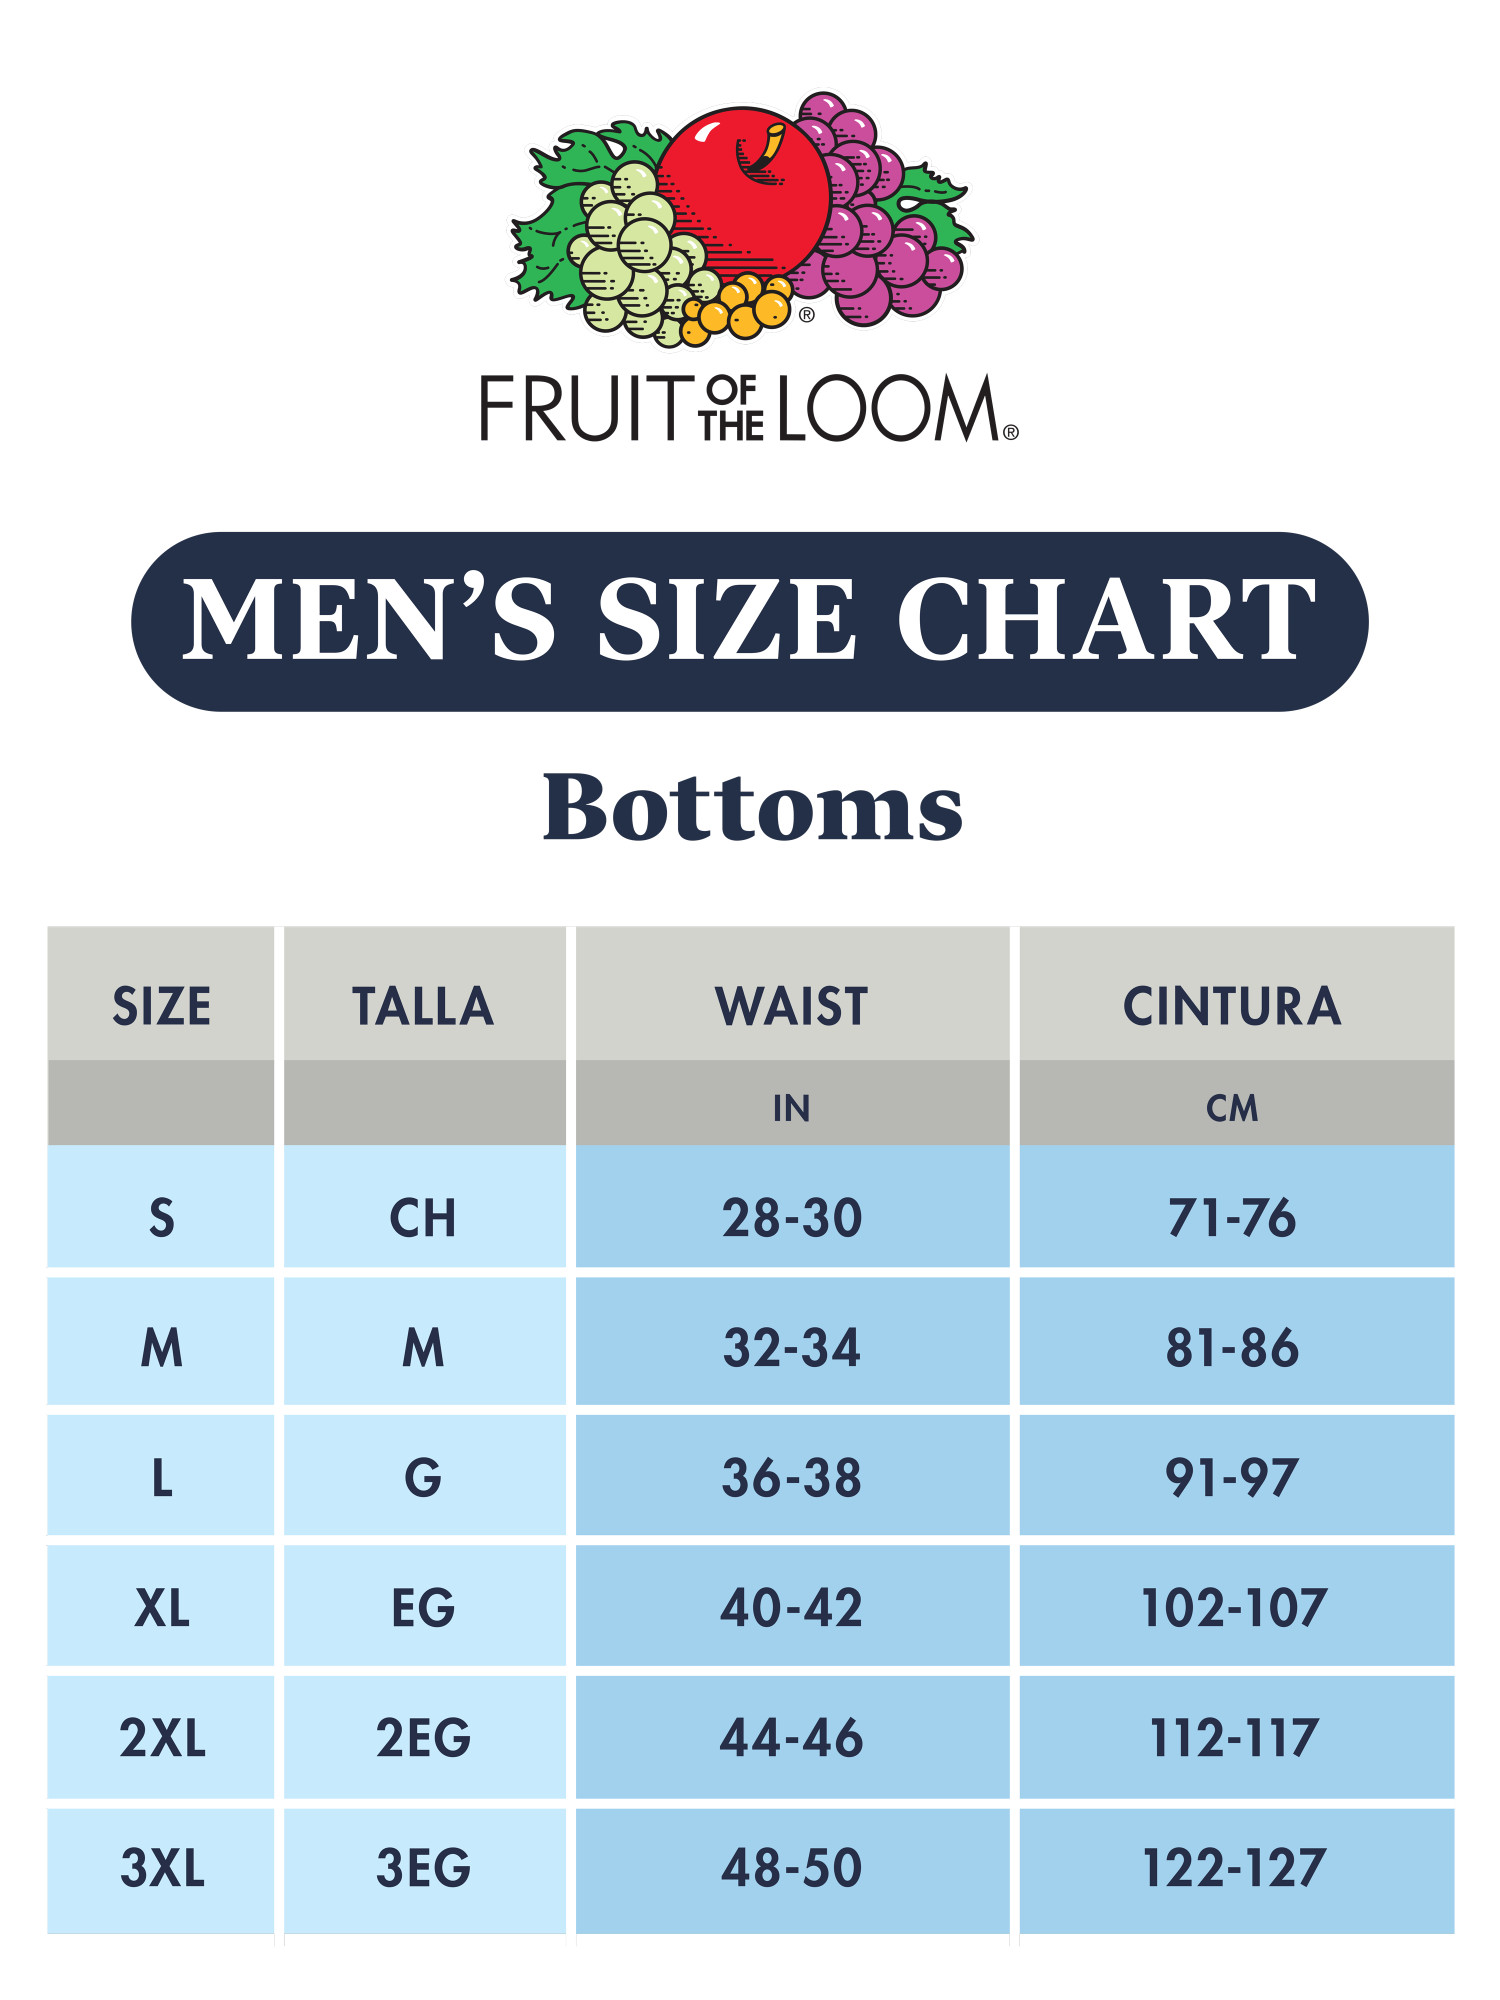 Fruit of the Loom Men's Woven Boxers, 6 Pack - image 4 of 6